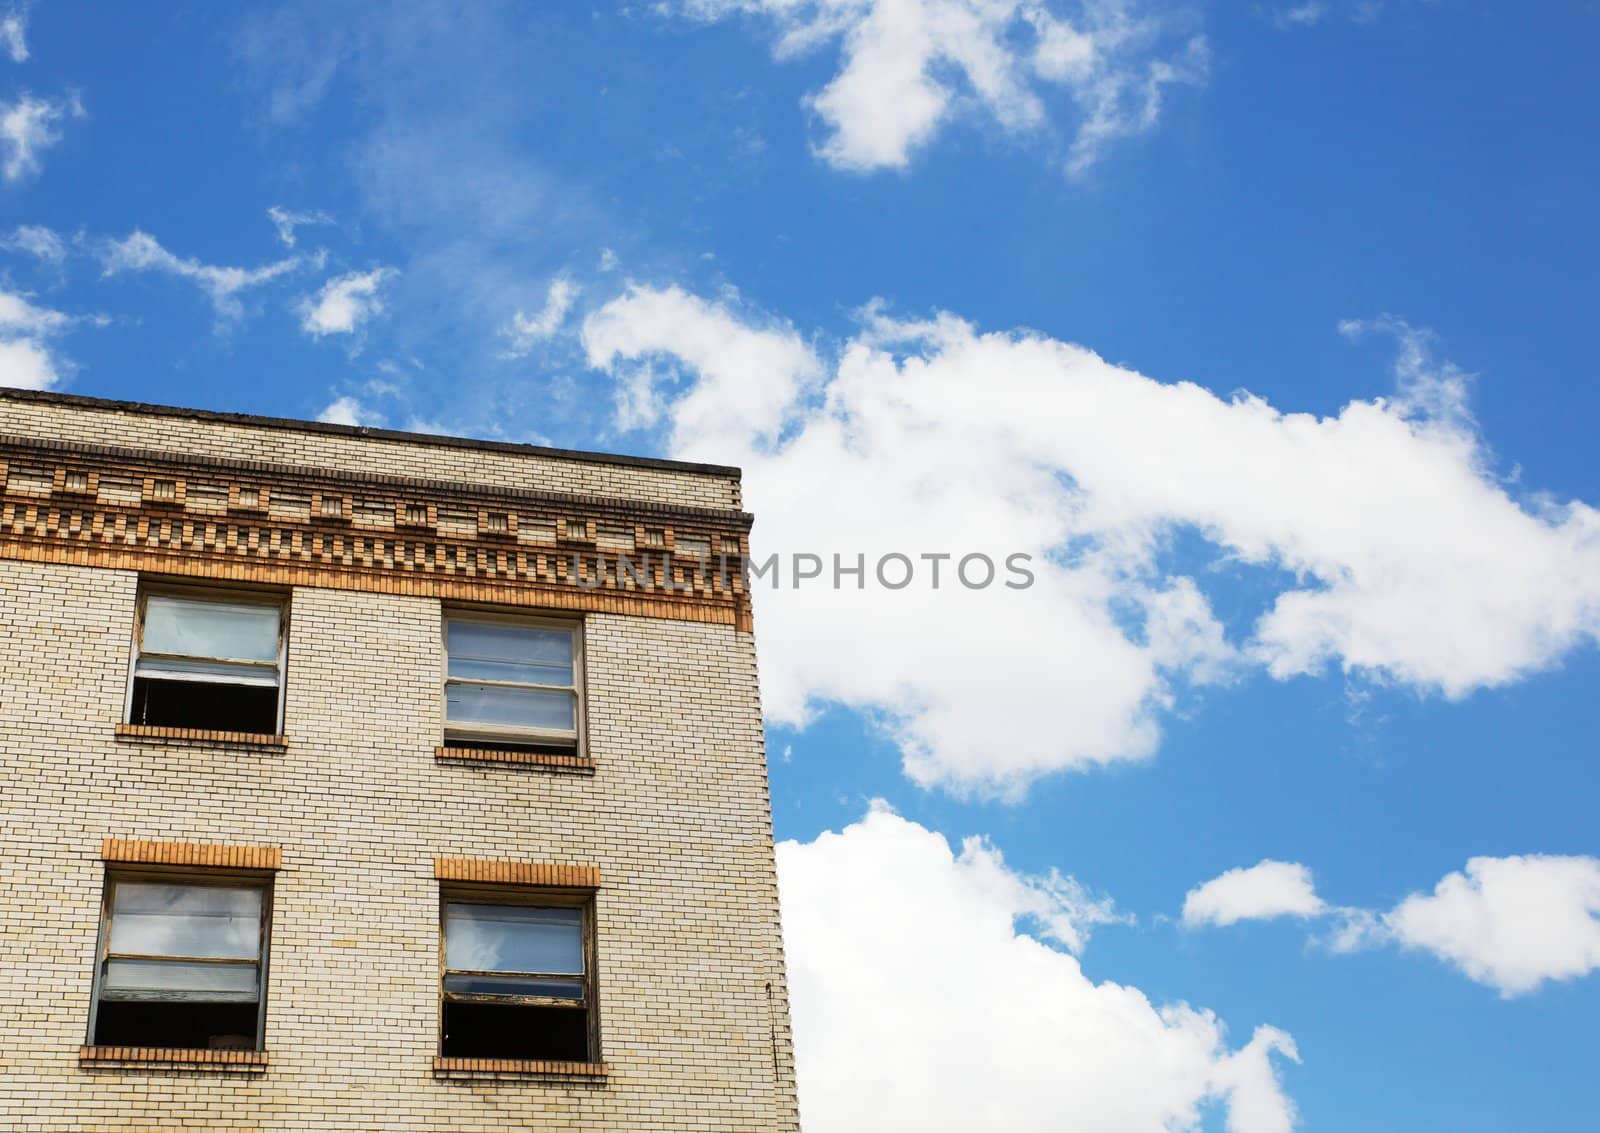 Old Tan brick building with four window against a brilliant blue sky with puffy white clouds